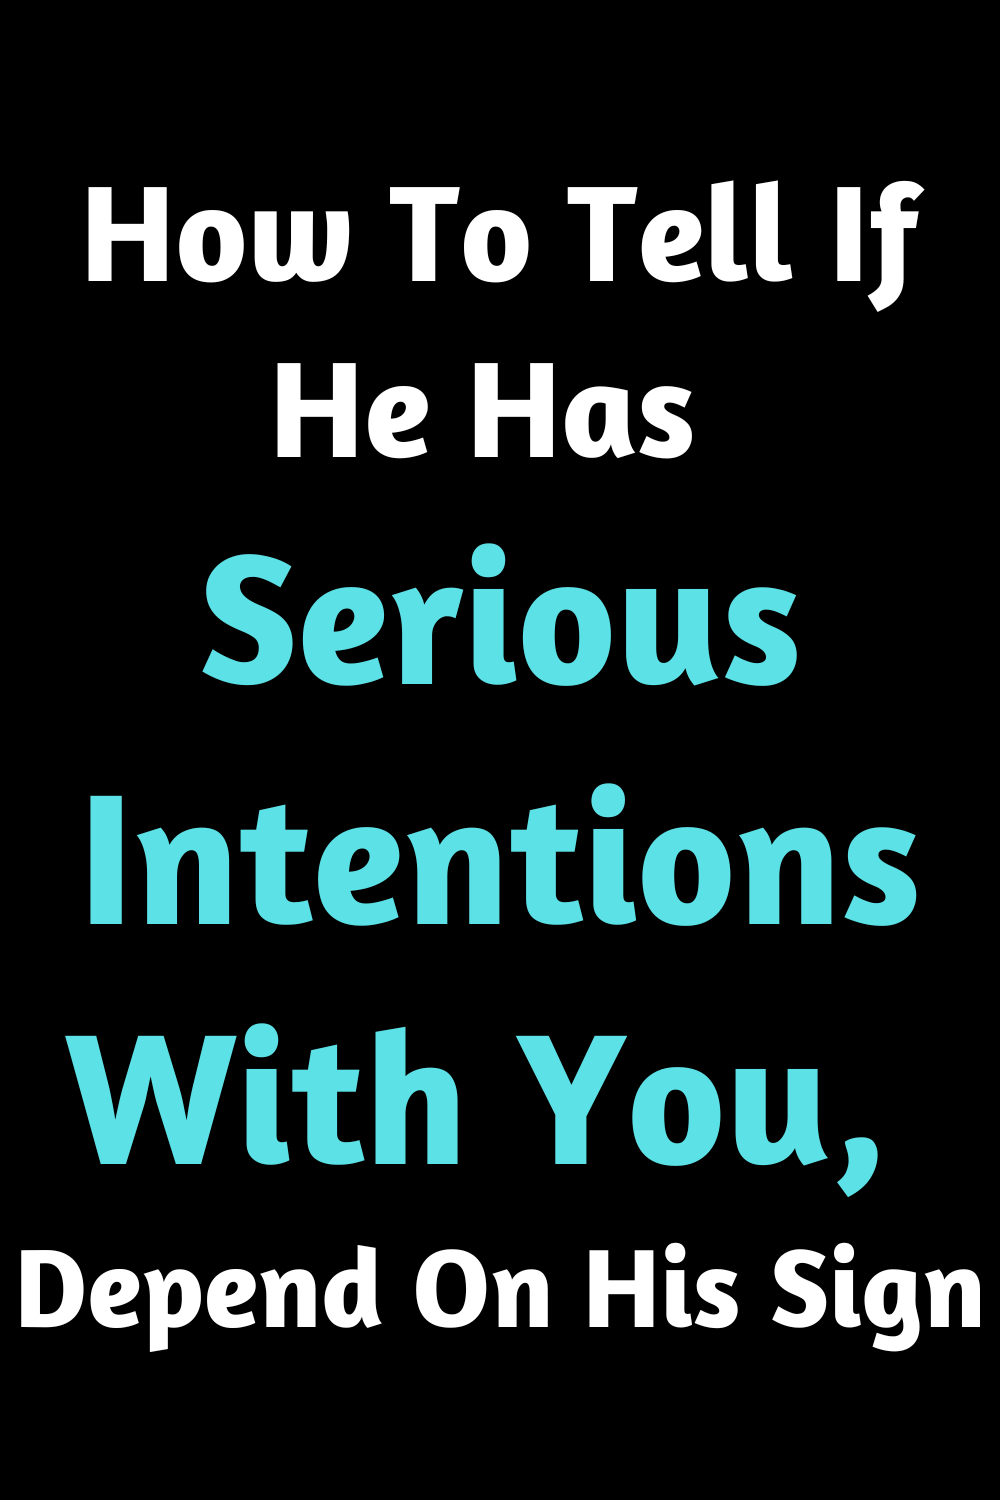 How To Tell If He Has Serious Intentions With You, Depend On His Sign